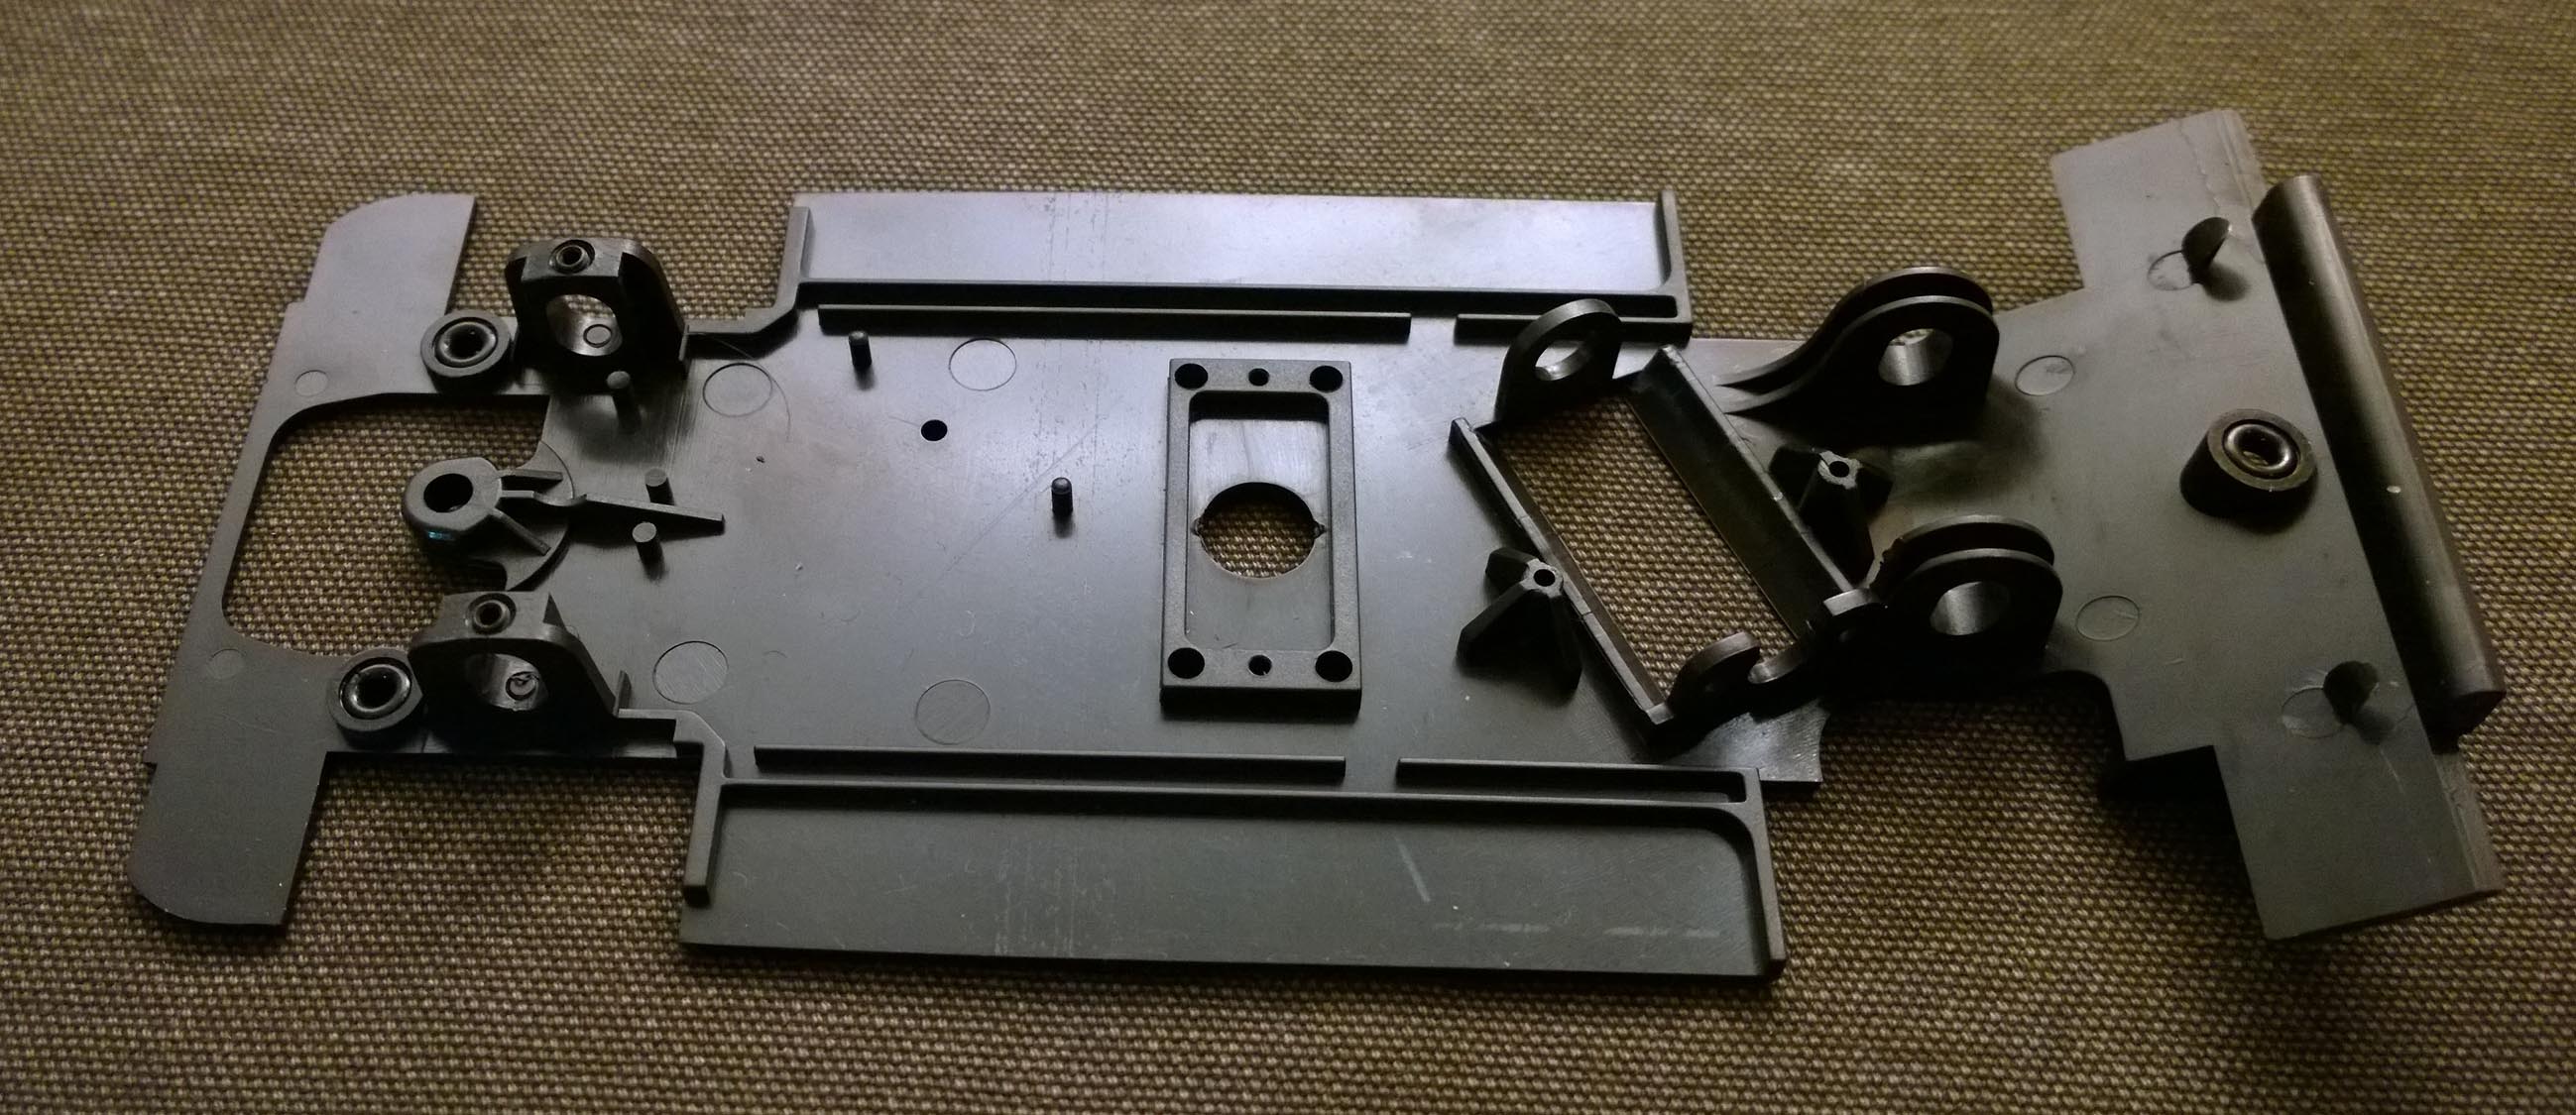 S-008AW Porsche 962 Anglewinder Chassis with o ring mounts.